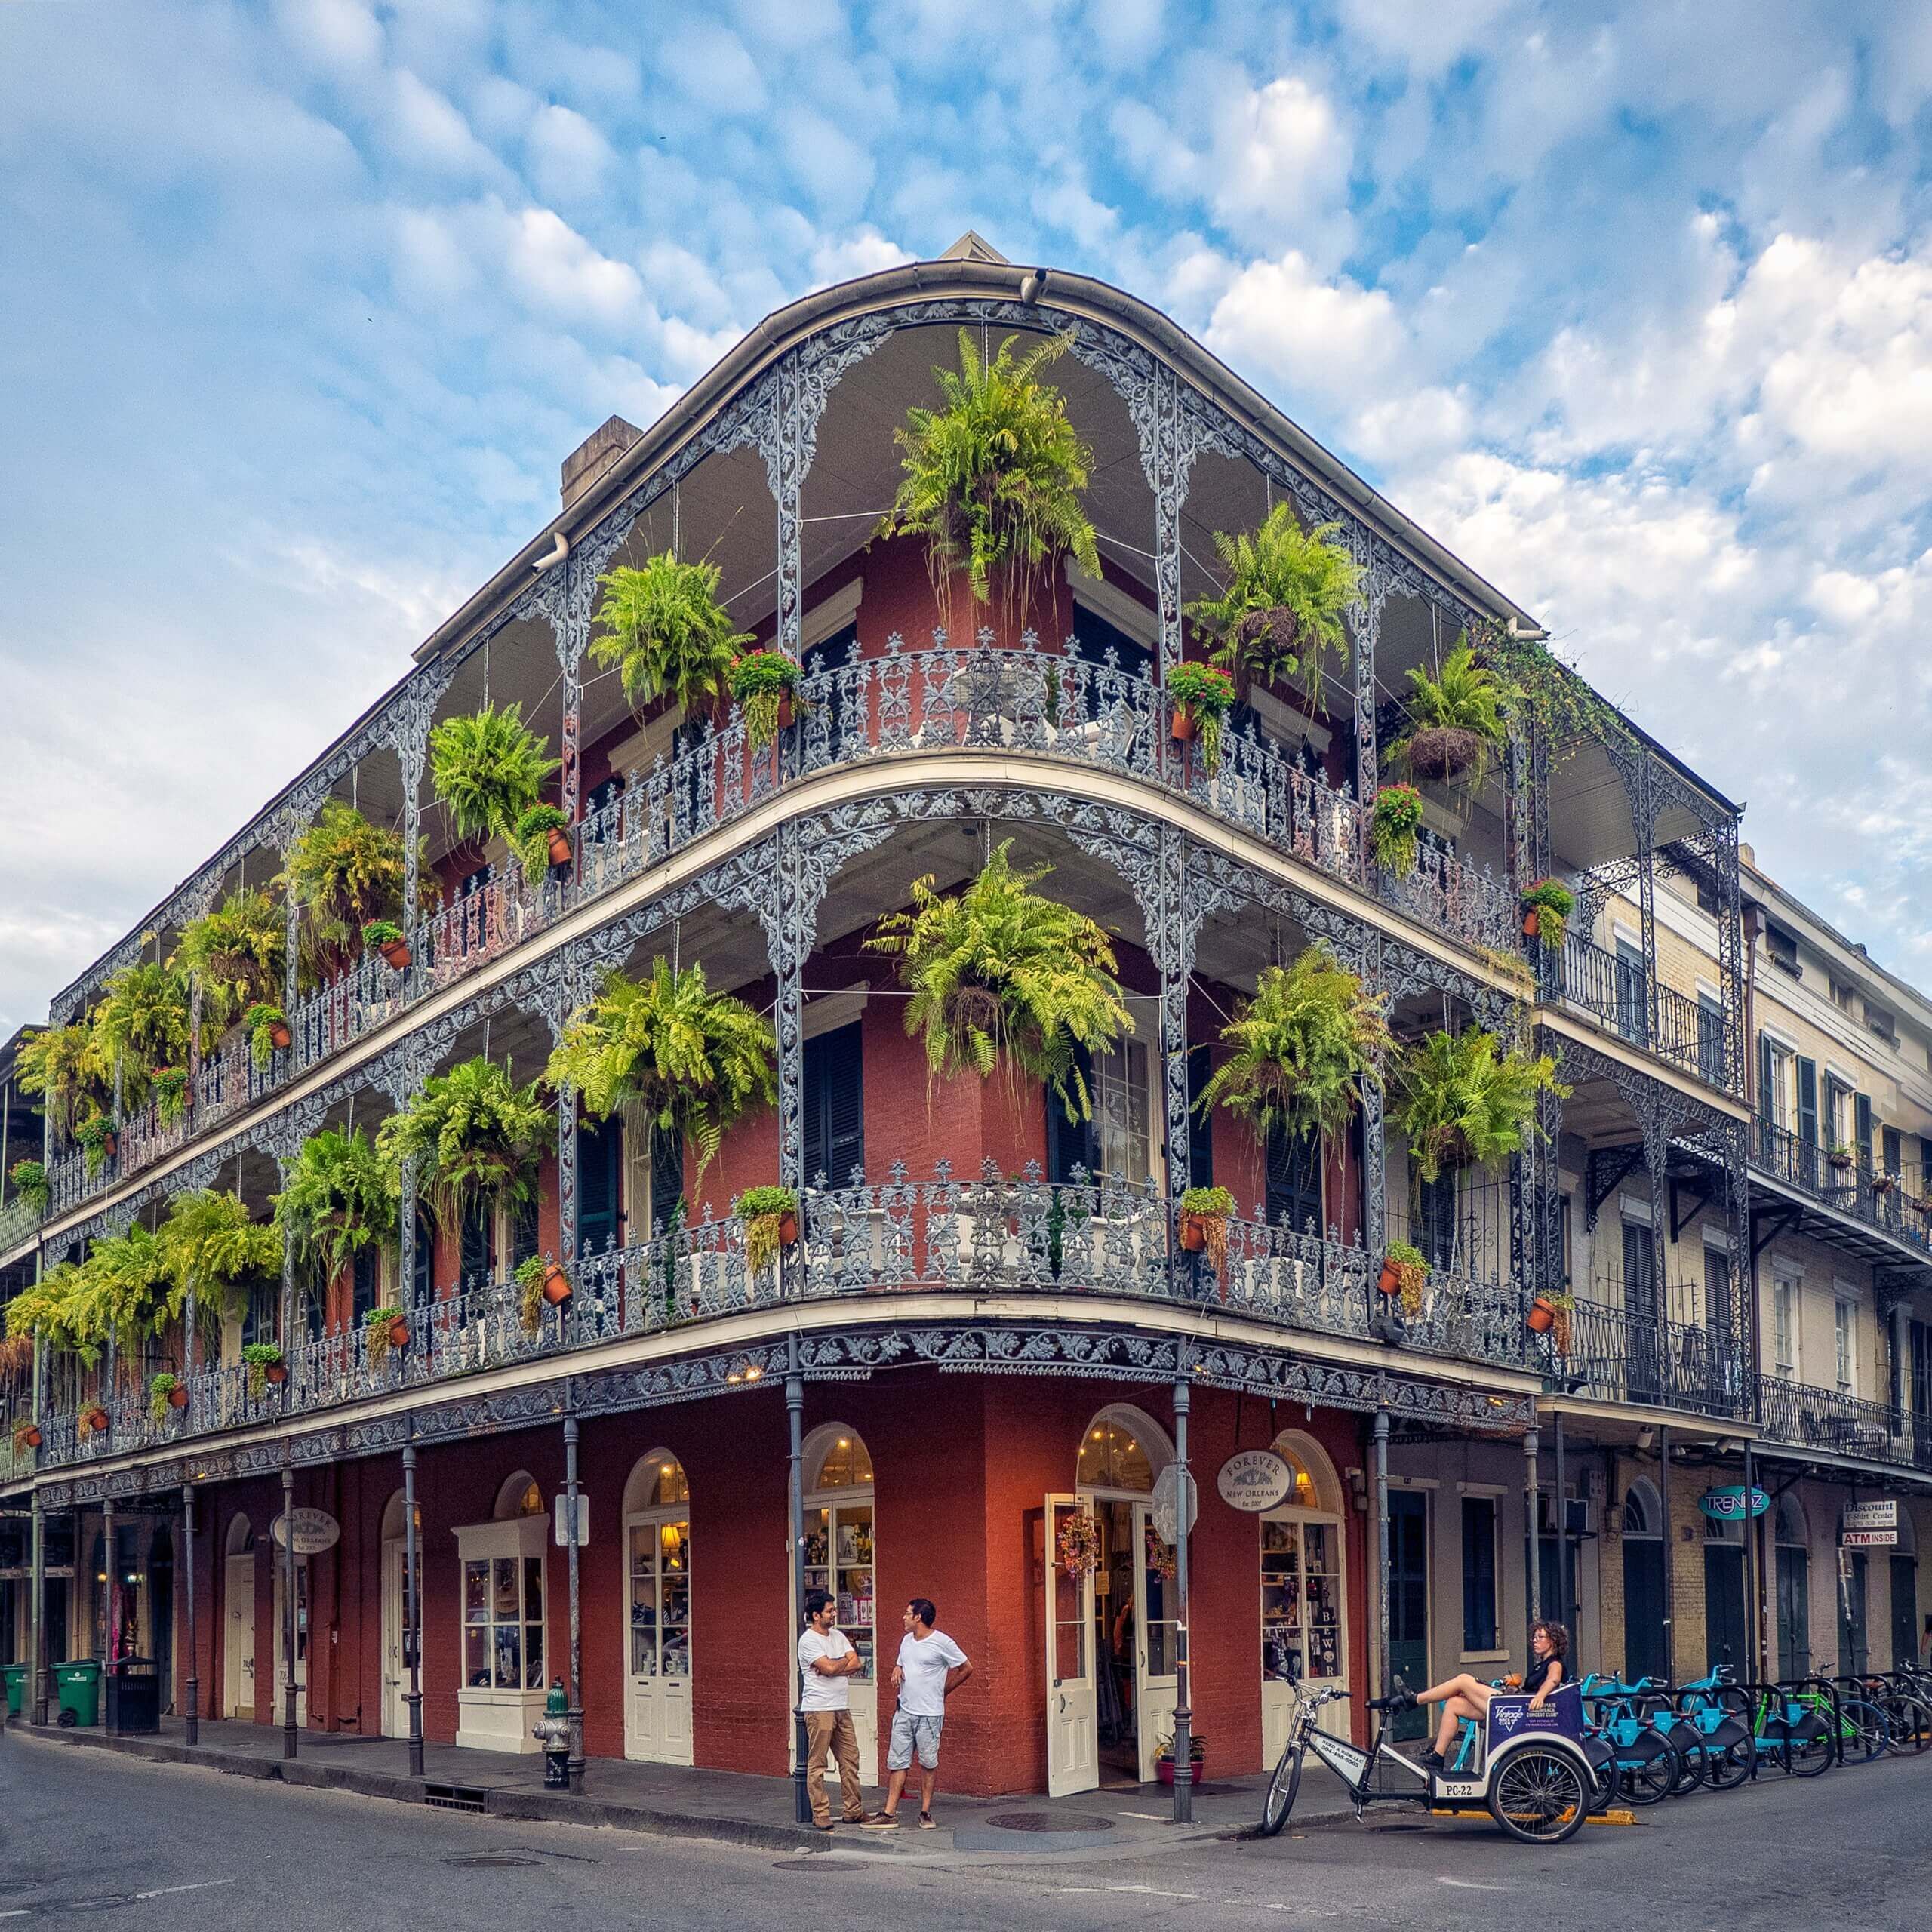 Building in the French Quarter of New Orleans, Louisiana.